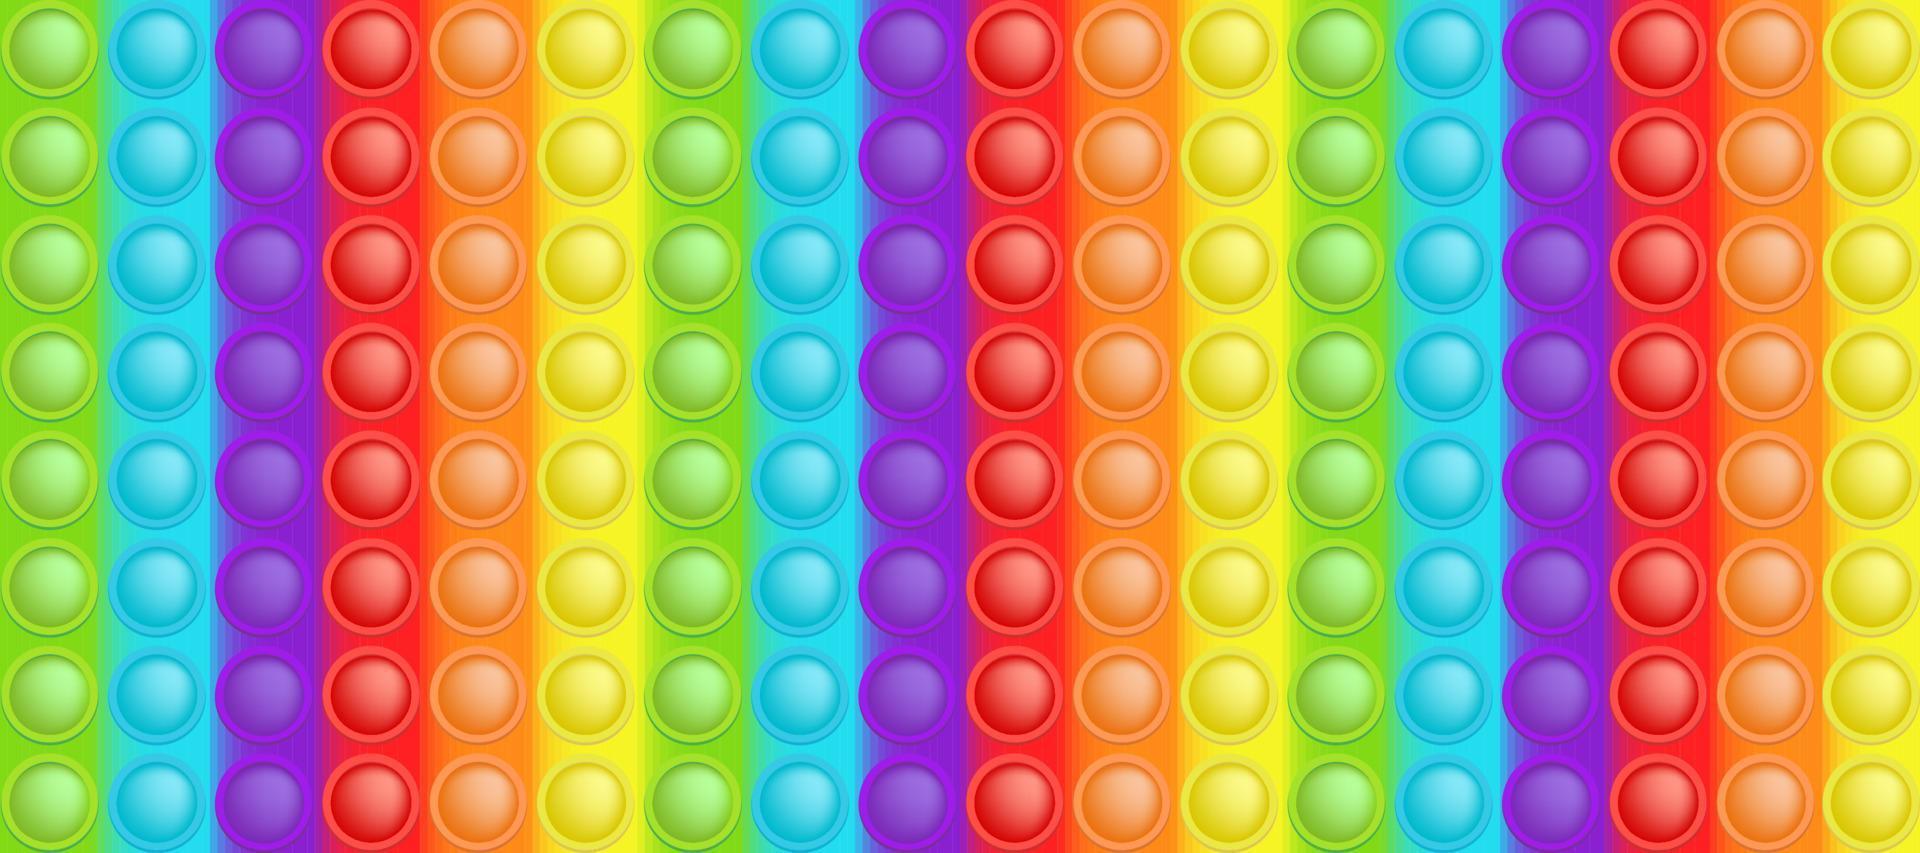 Popping toy colorful rainbow background like a fashionable silicon toy for fidgets. Addictive anti stress bubble toy in bright colors. Vector illustration in rectangle format suitable for bunner.